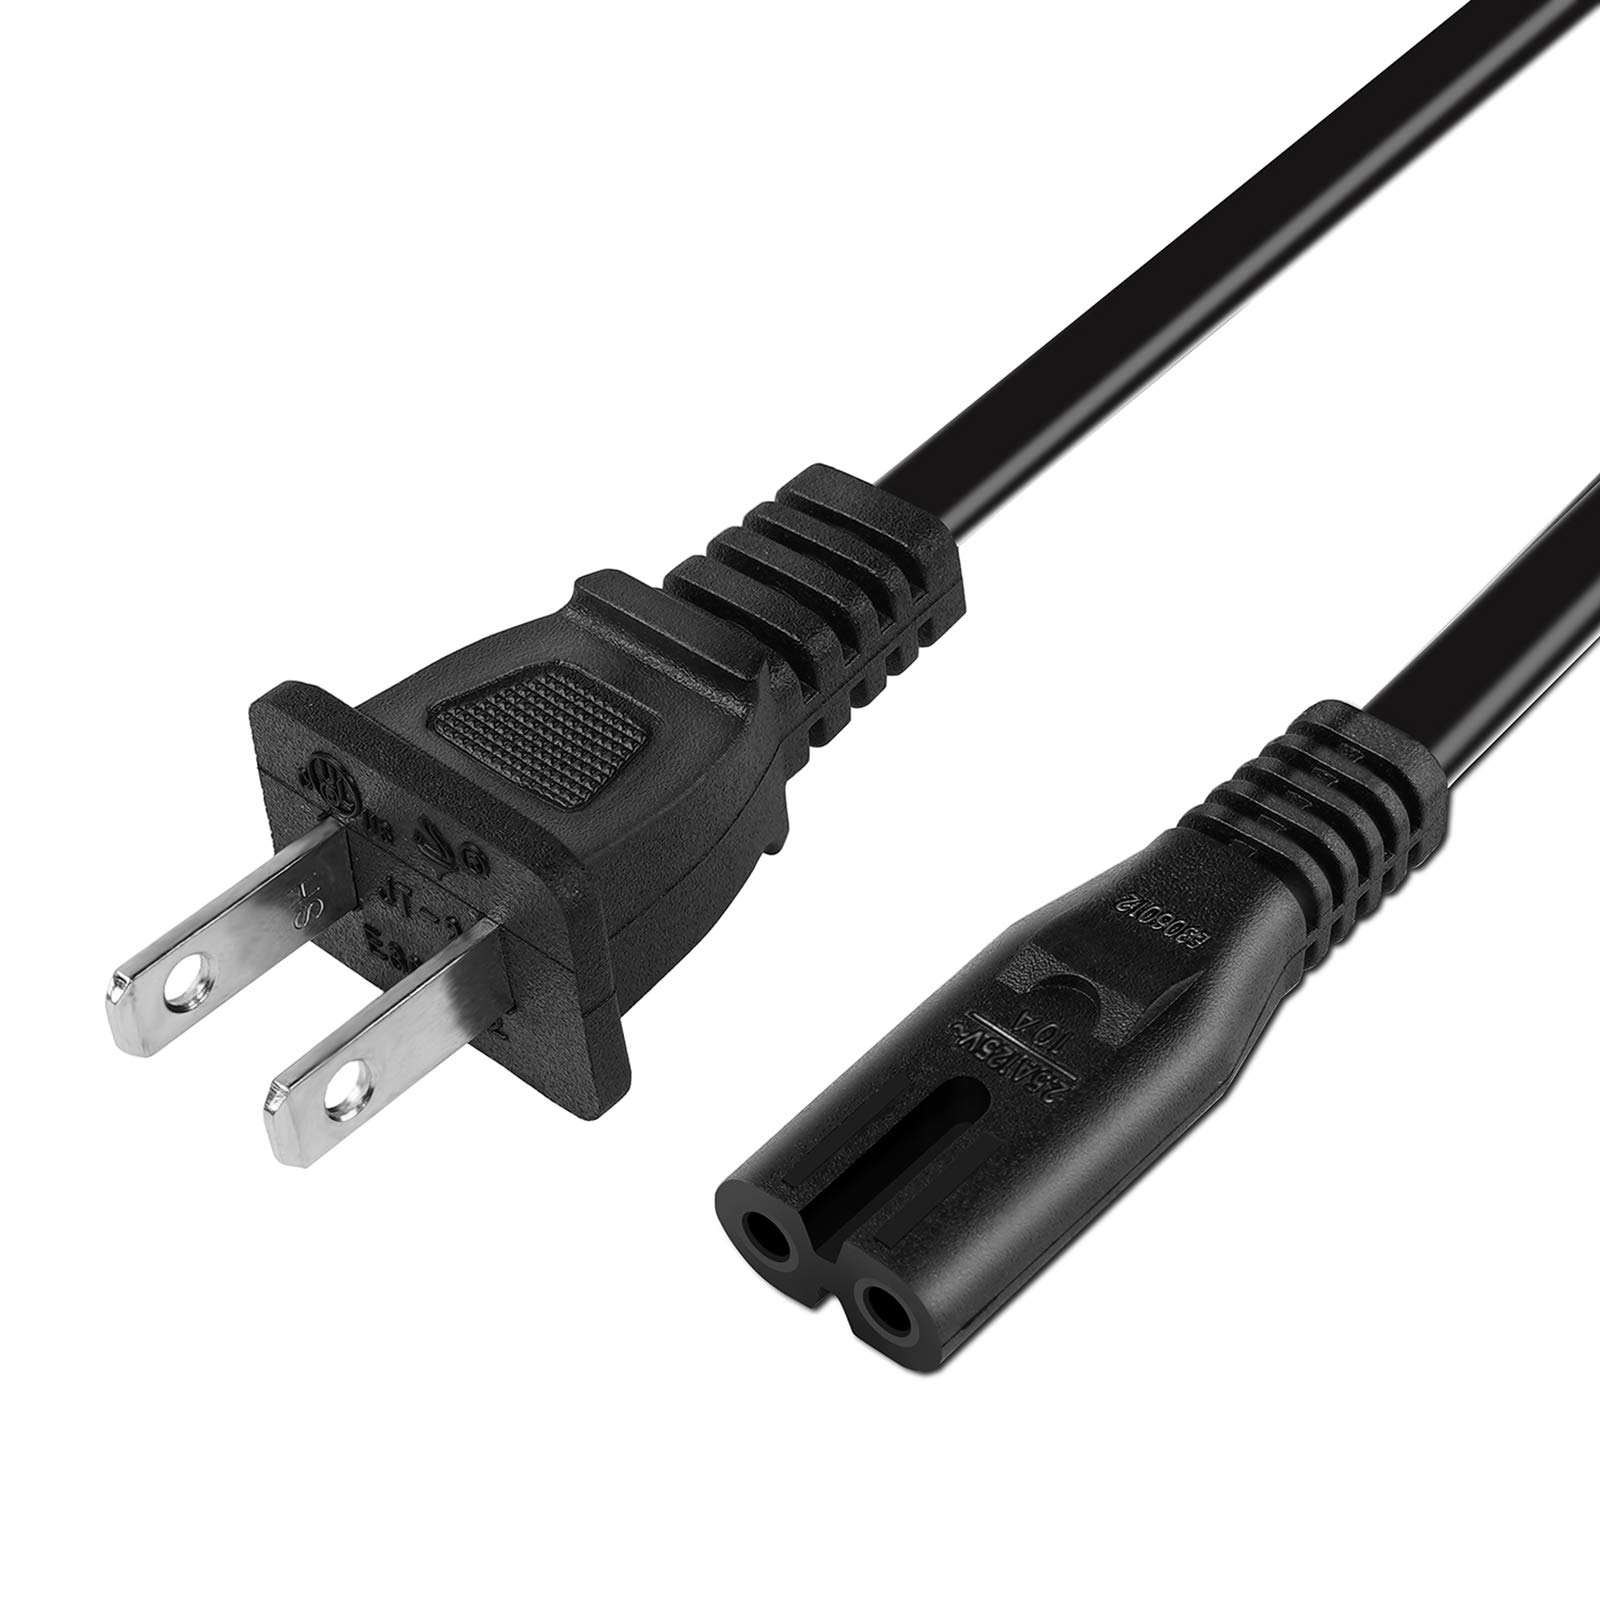 is the ps4 and ps5 power cord the same